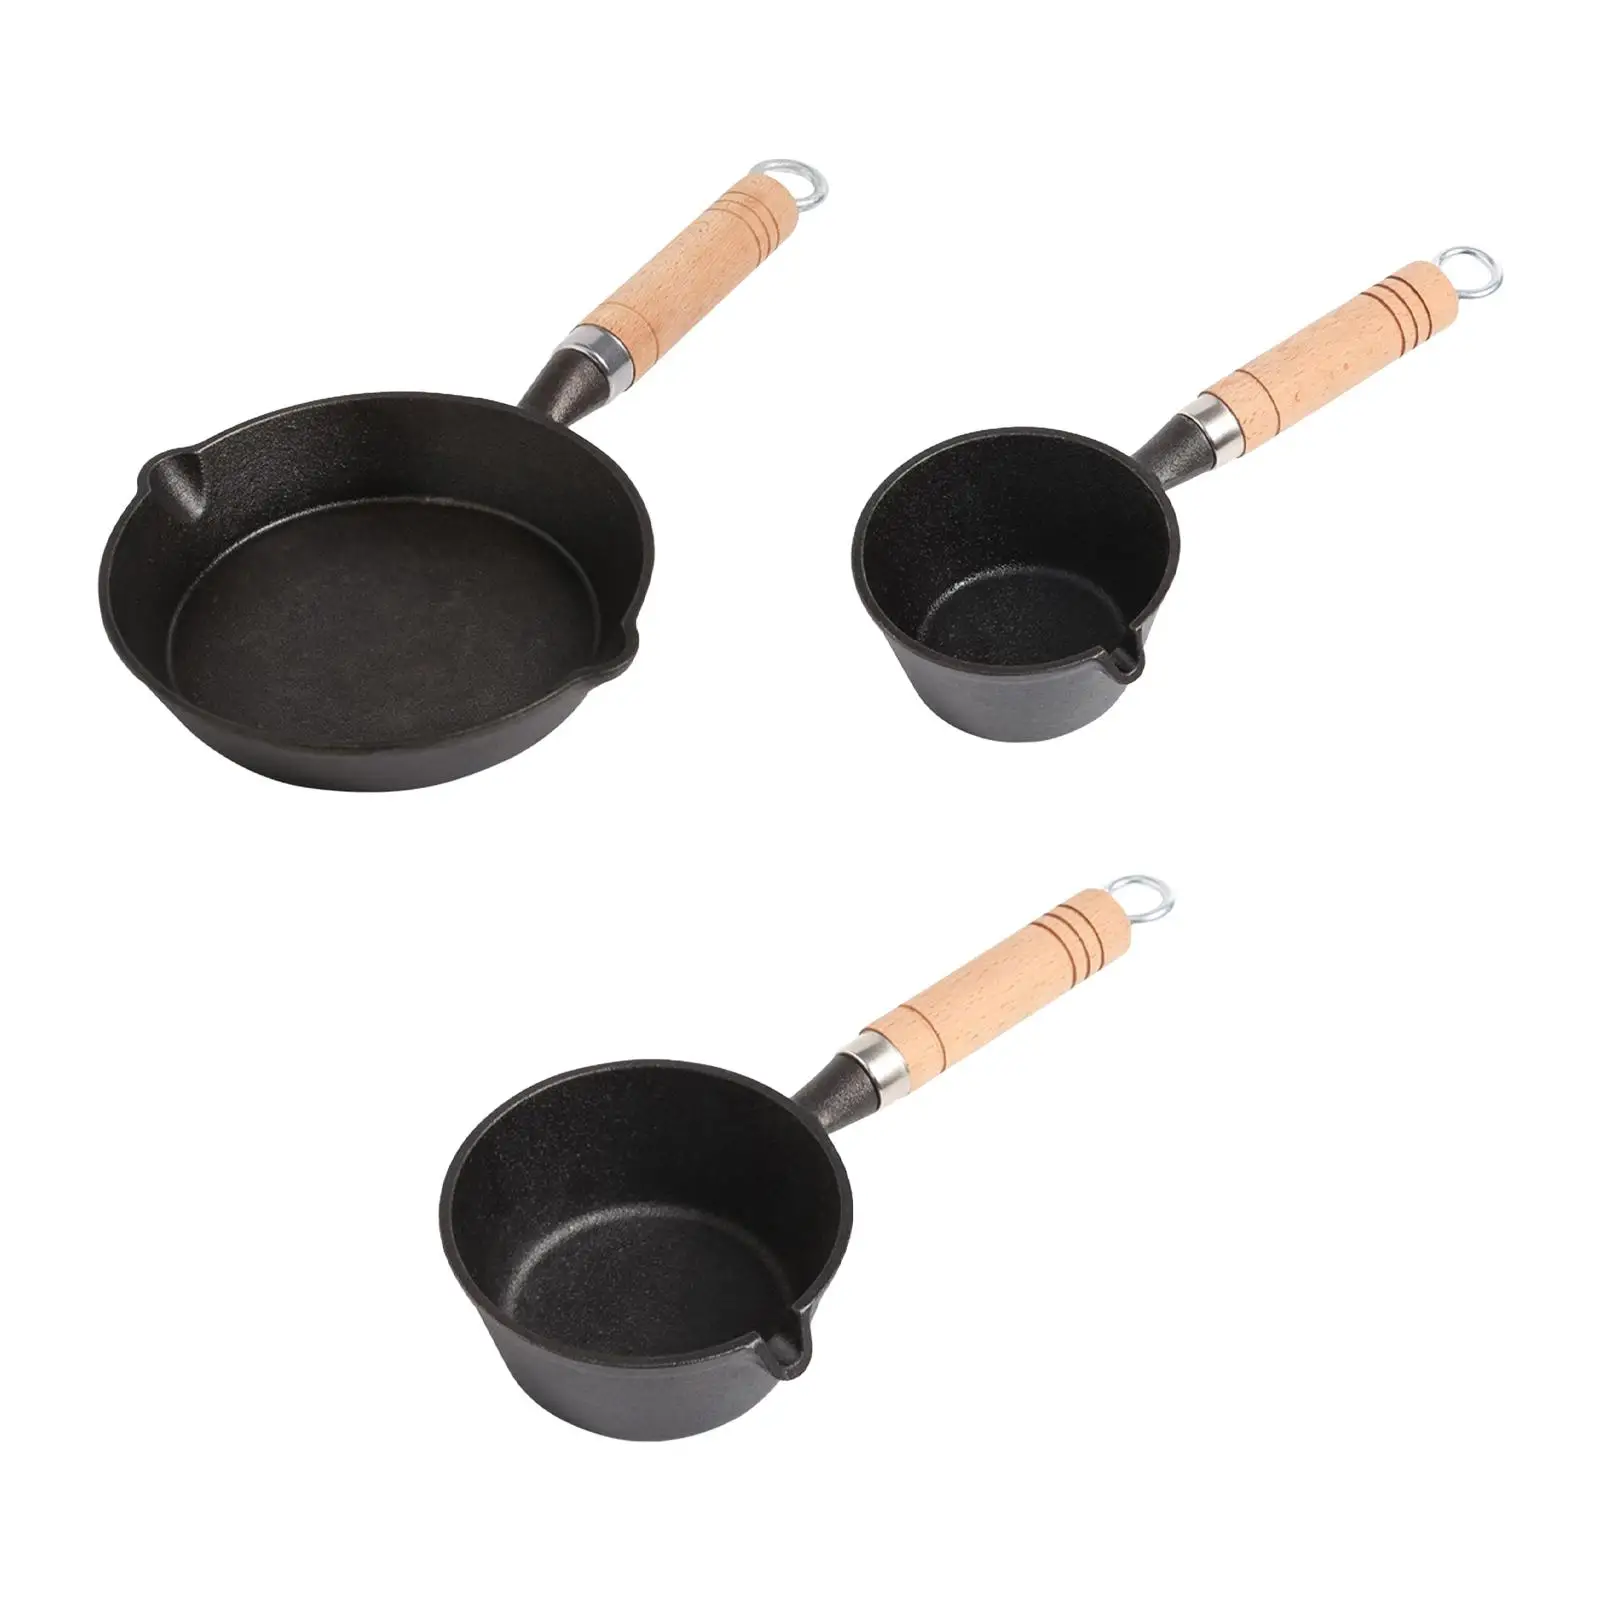 Mini Cast Iron Skillet Pan Small Omelette Pan Cooking Pan Portable Black Durable Double Sided Pouring Spout Design Wooden Handle